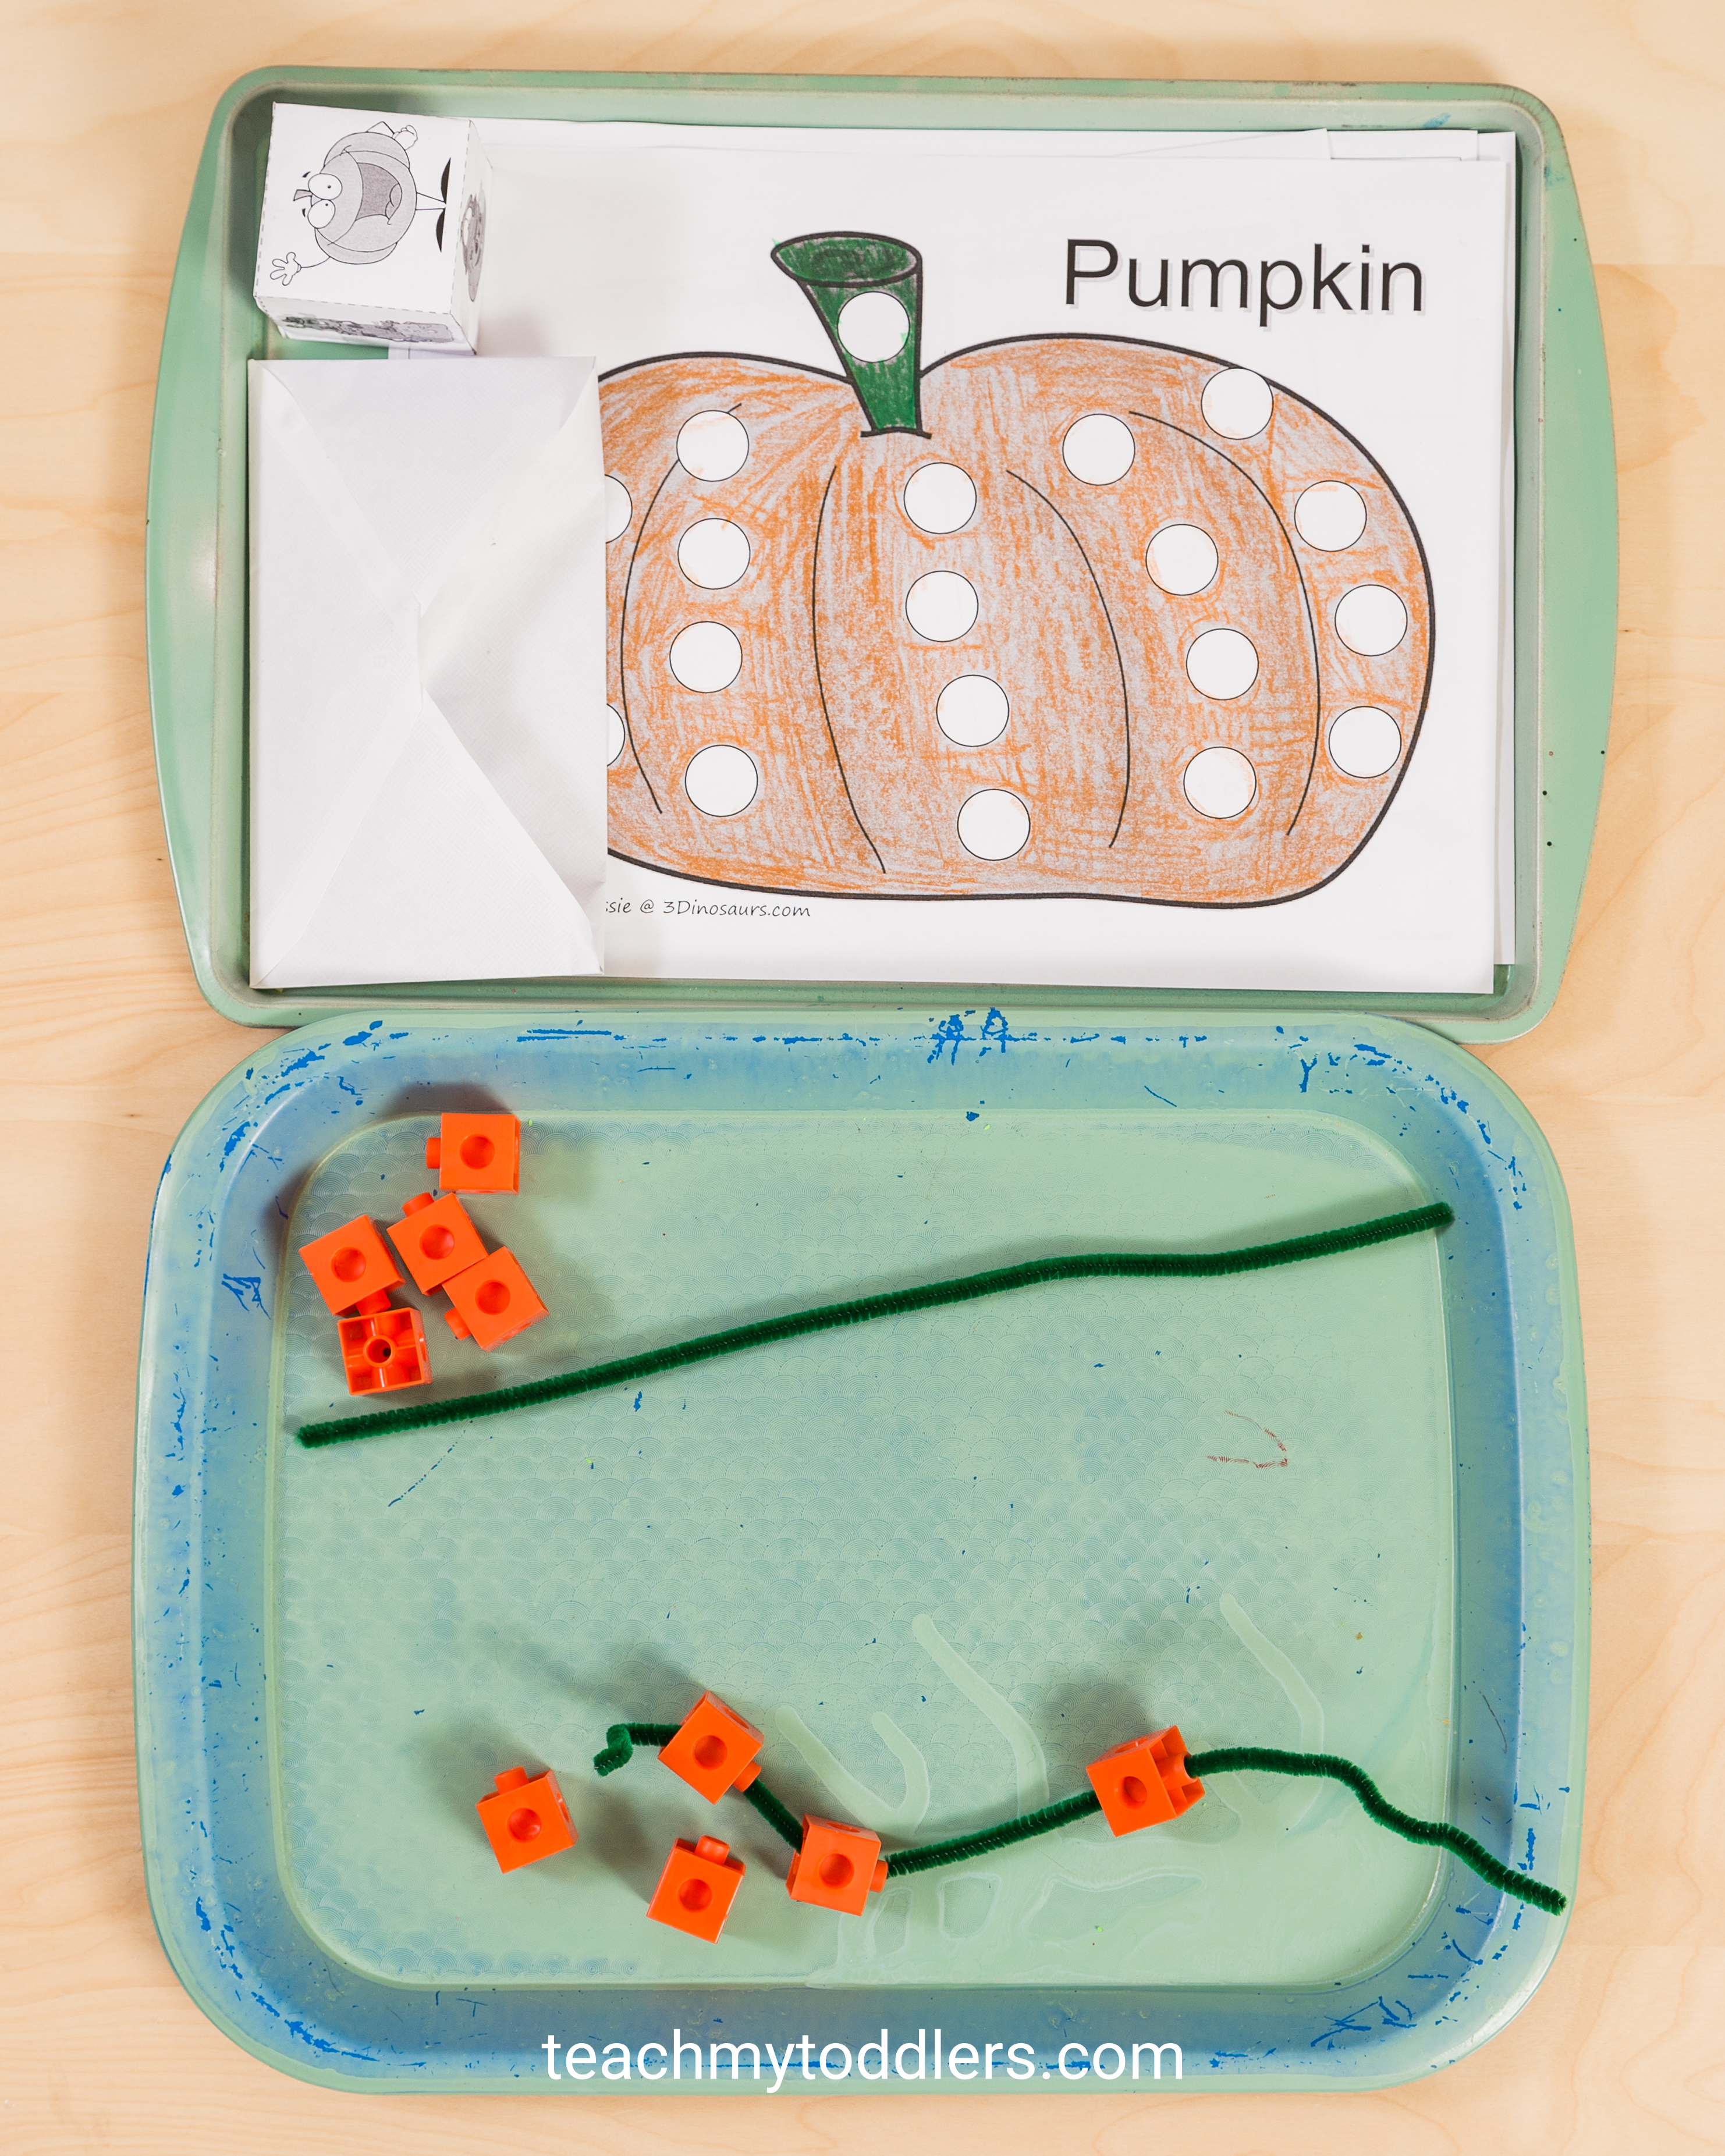 Find out how these pumpkin activities can teach your toddlers about fall